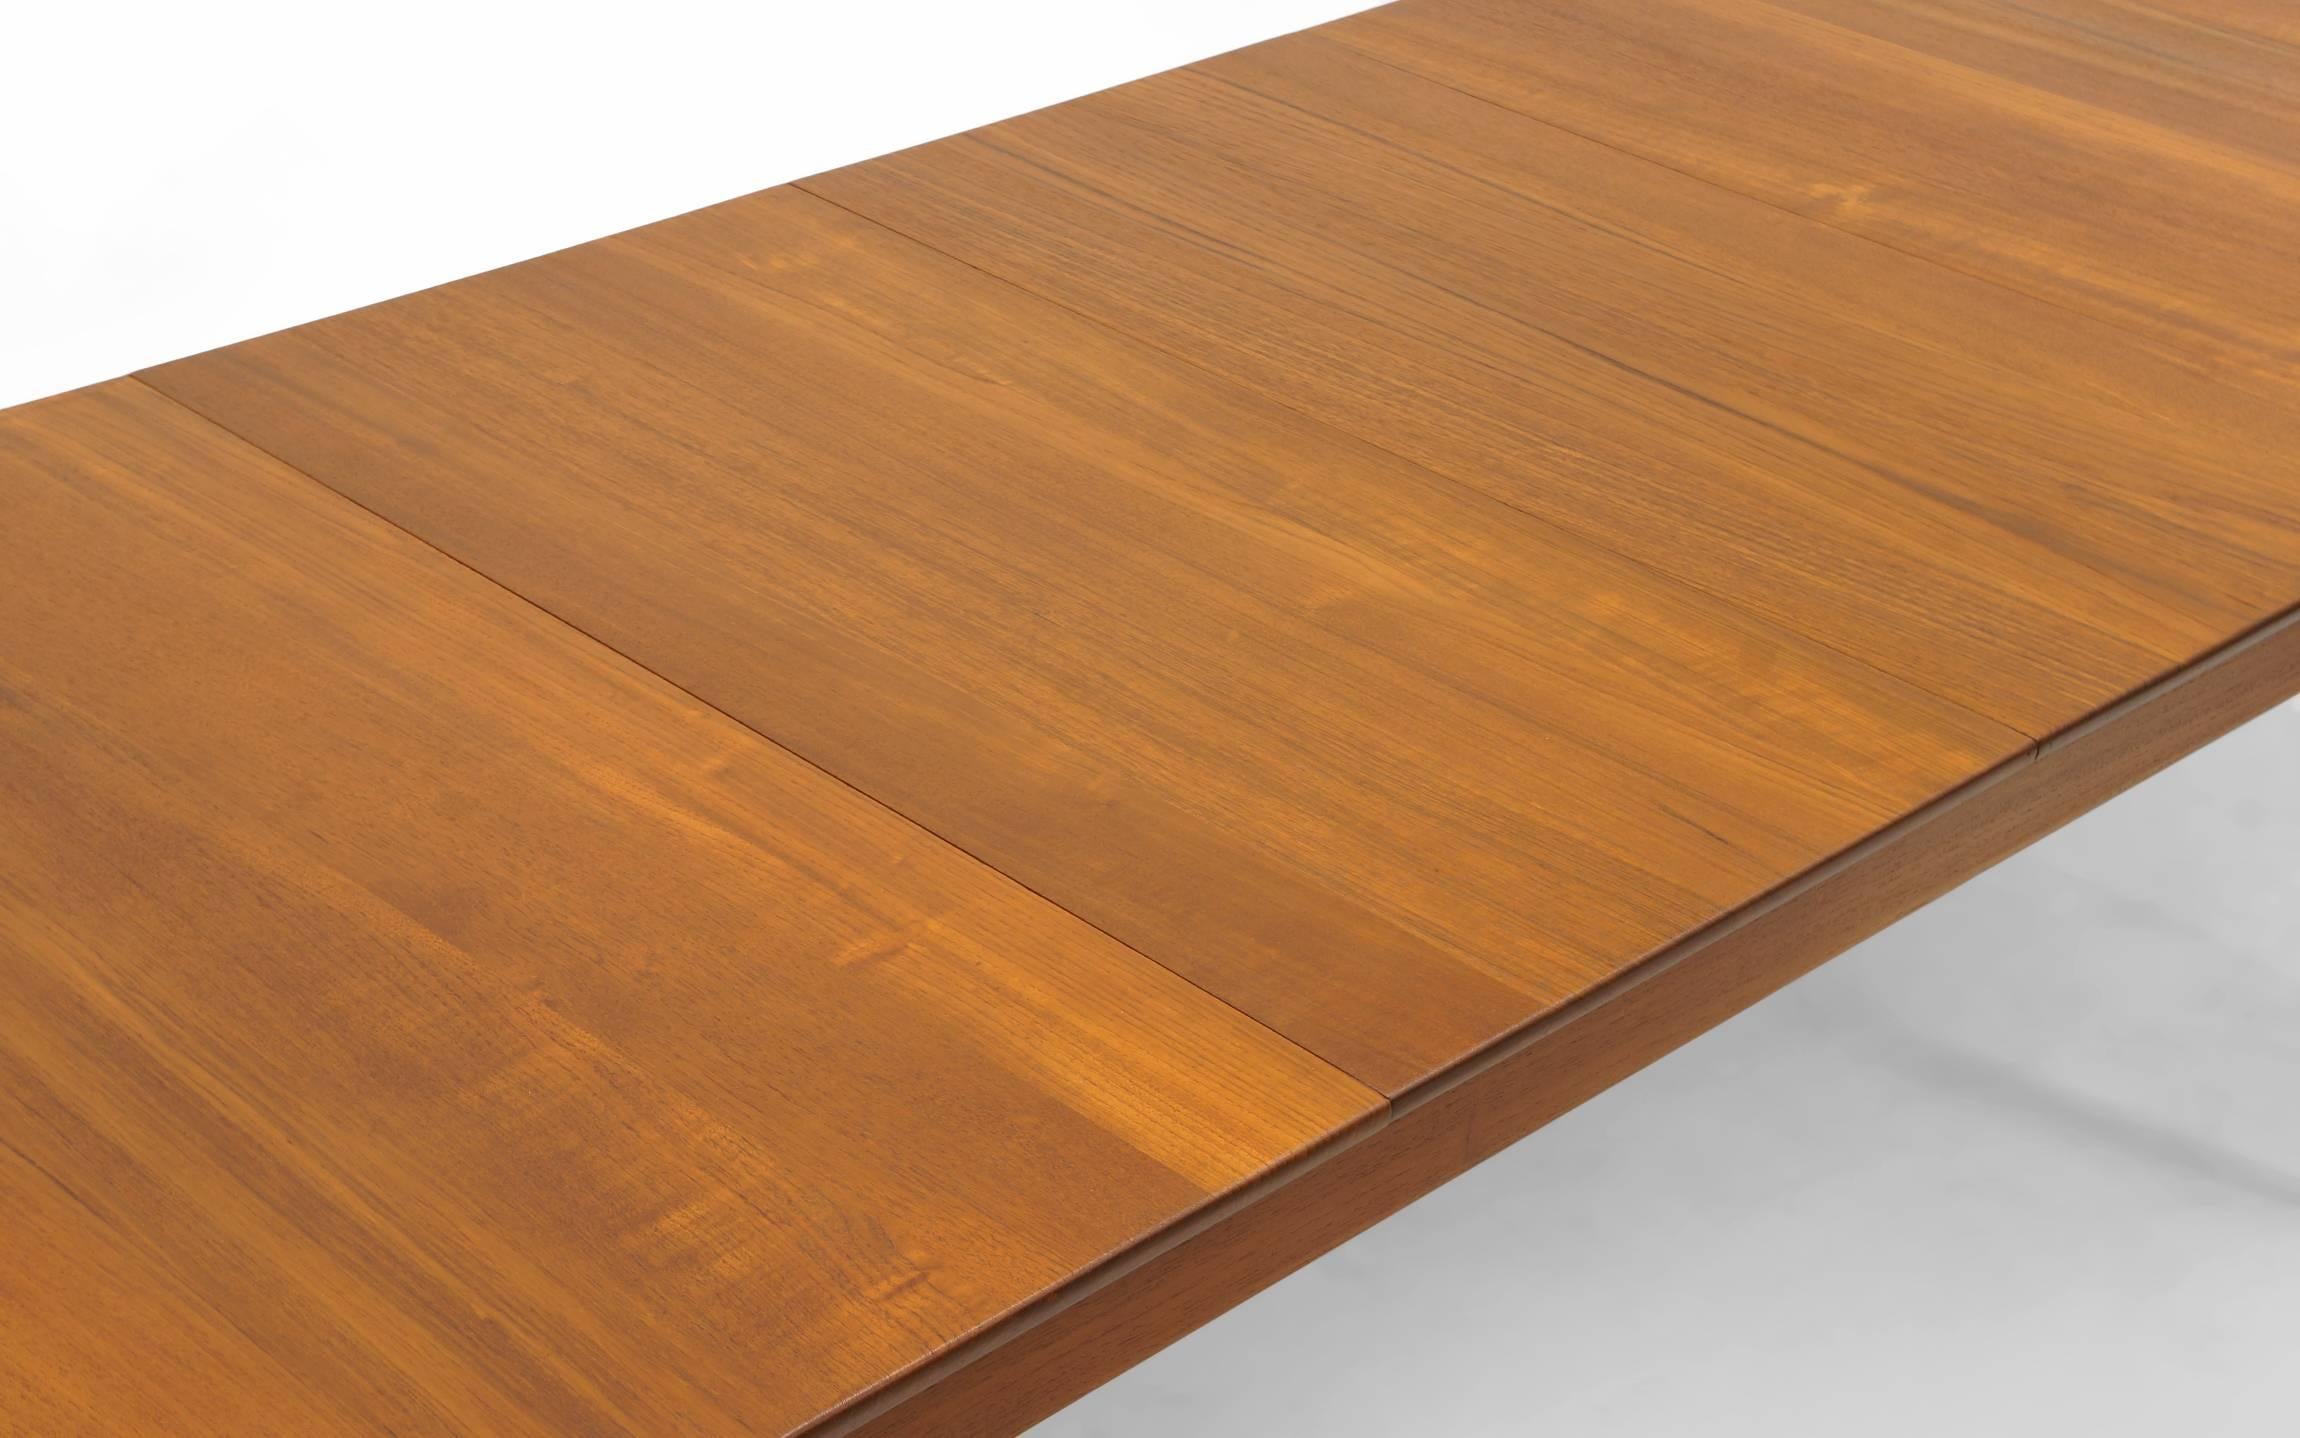 Scandinavian Modern Finn Juhl Teak Dining Table, Expandable with Two Leaves, Exceptional Condition